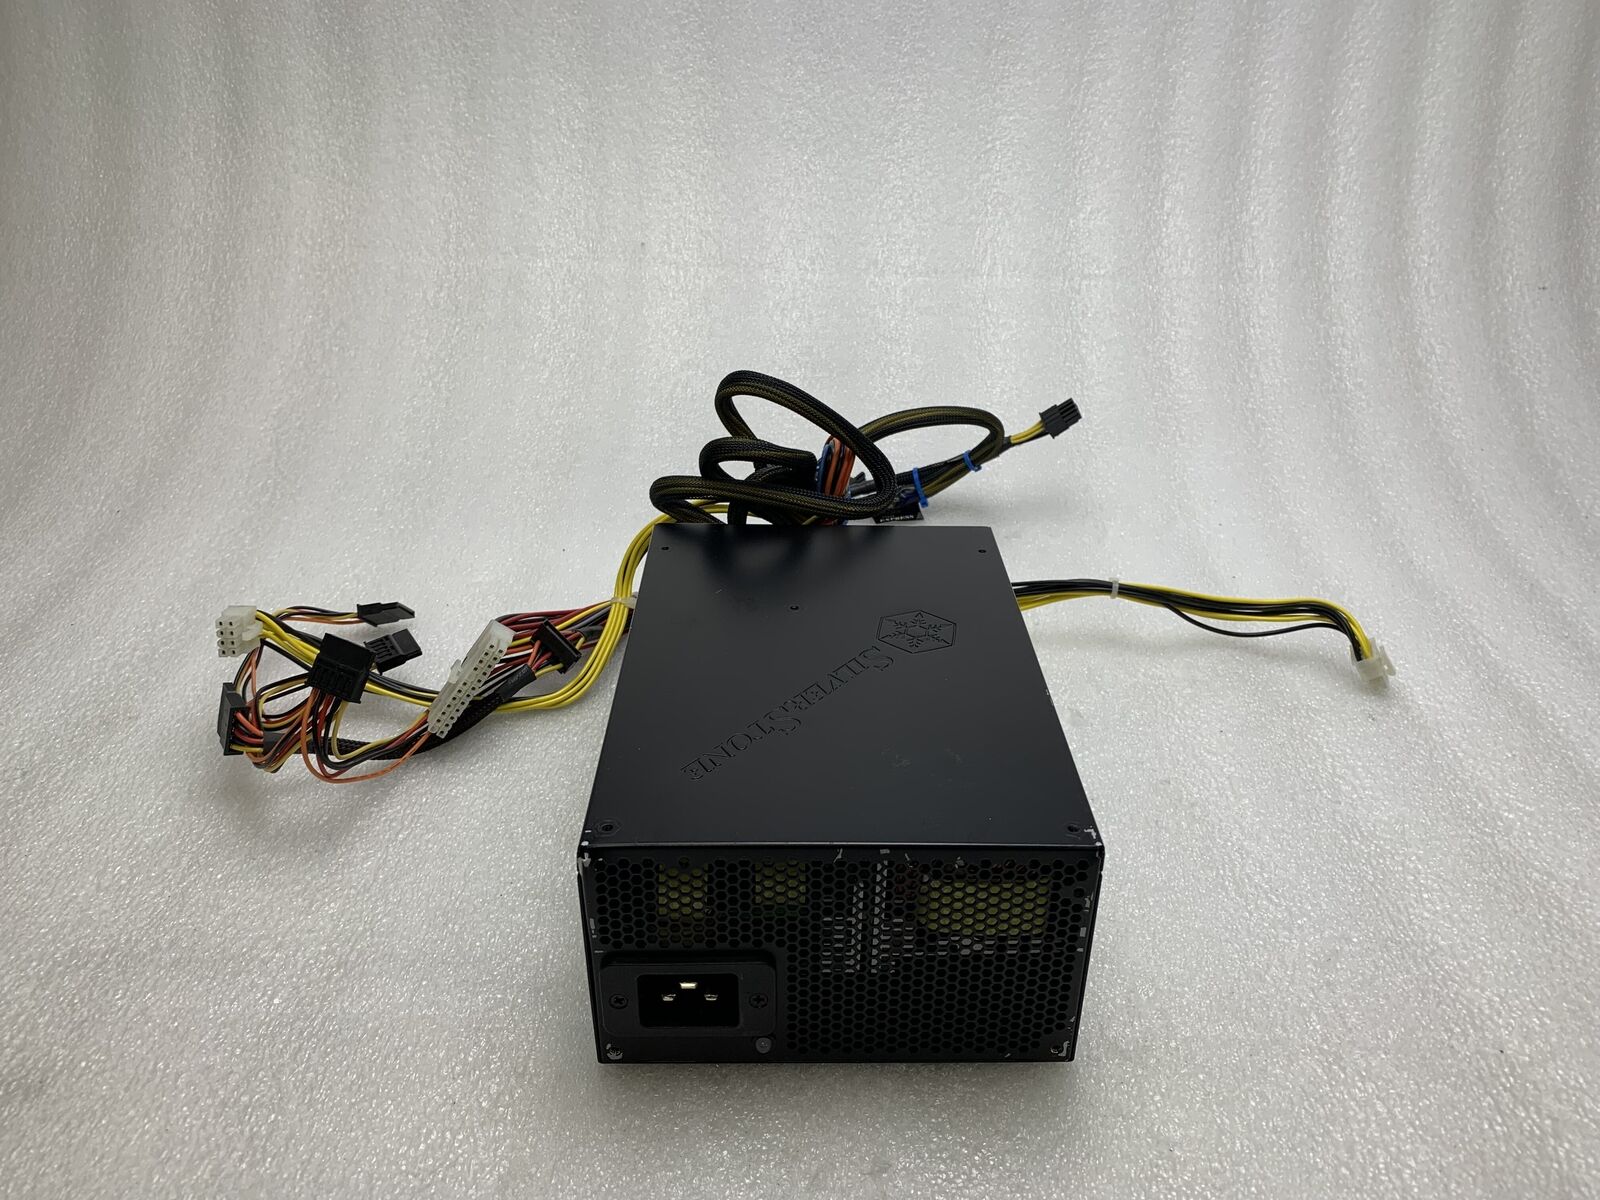 SilverStone SST-ST1500 ATX Power Supply 1500W Silver 80 PLUS AS-IS FOR PARTS